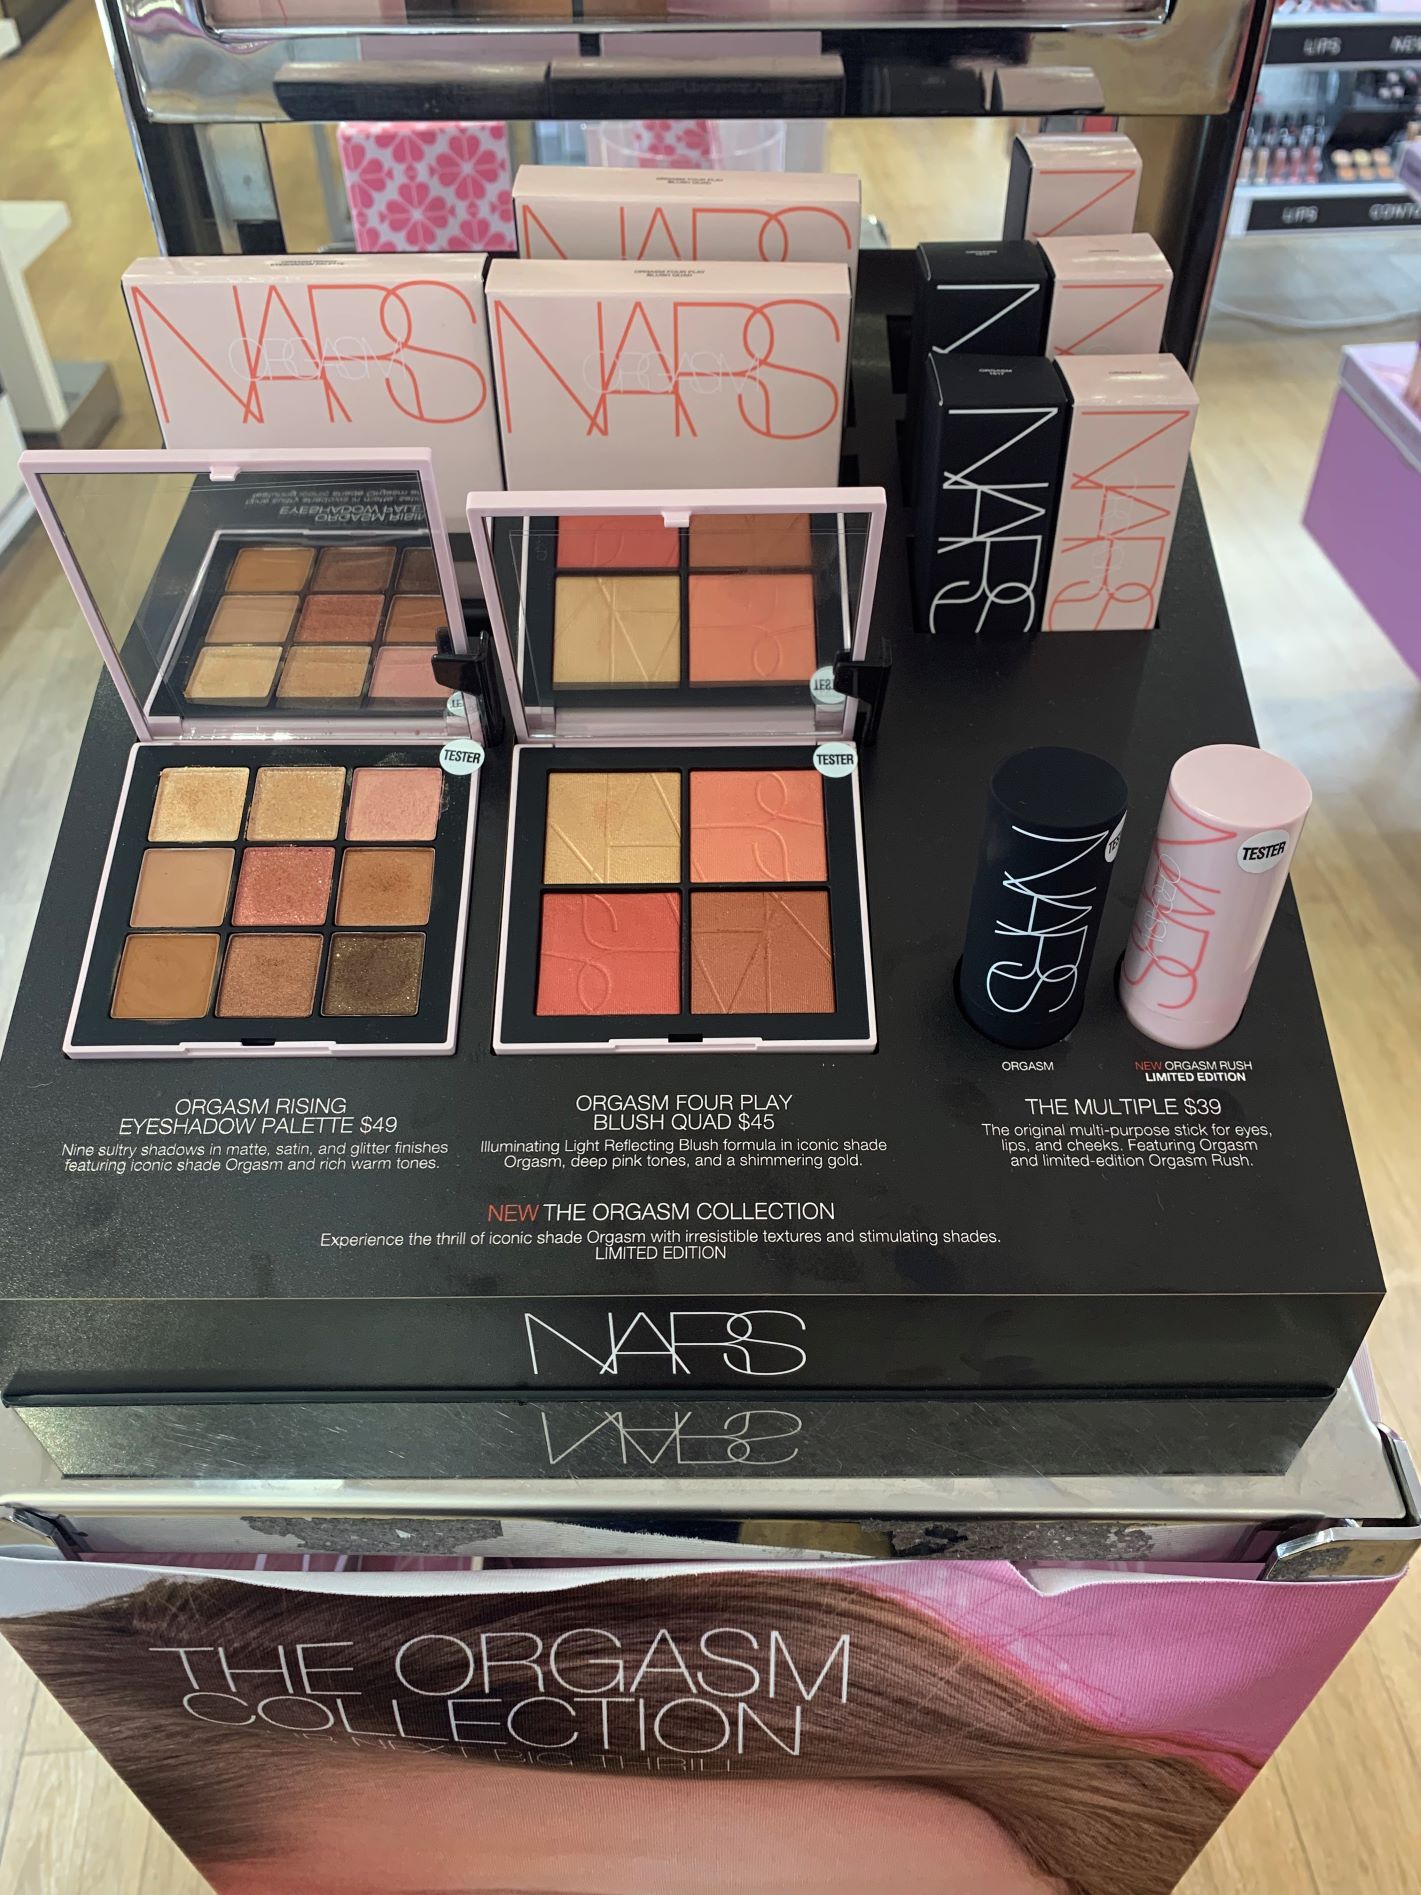 NARS Blush Collection Review & Swatches - All New Shades